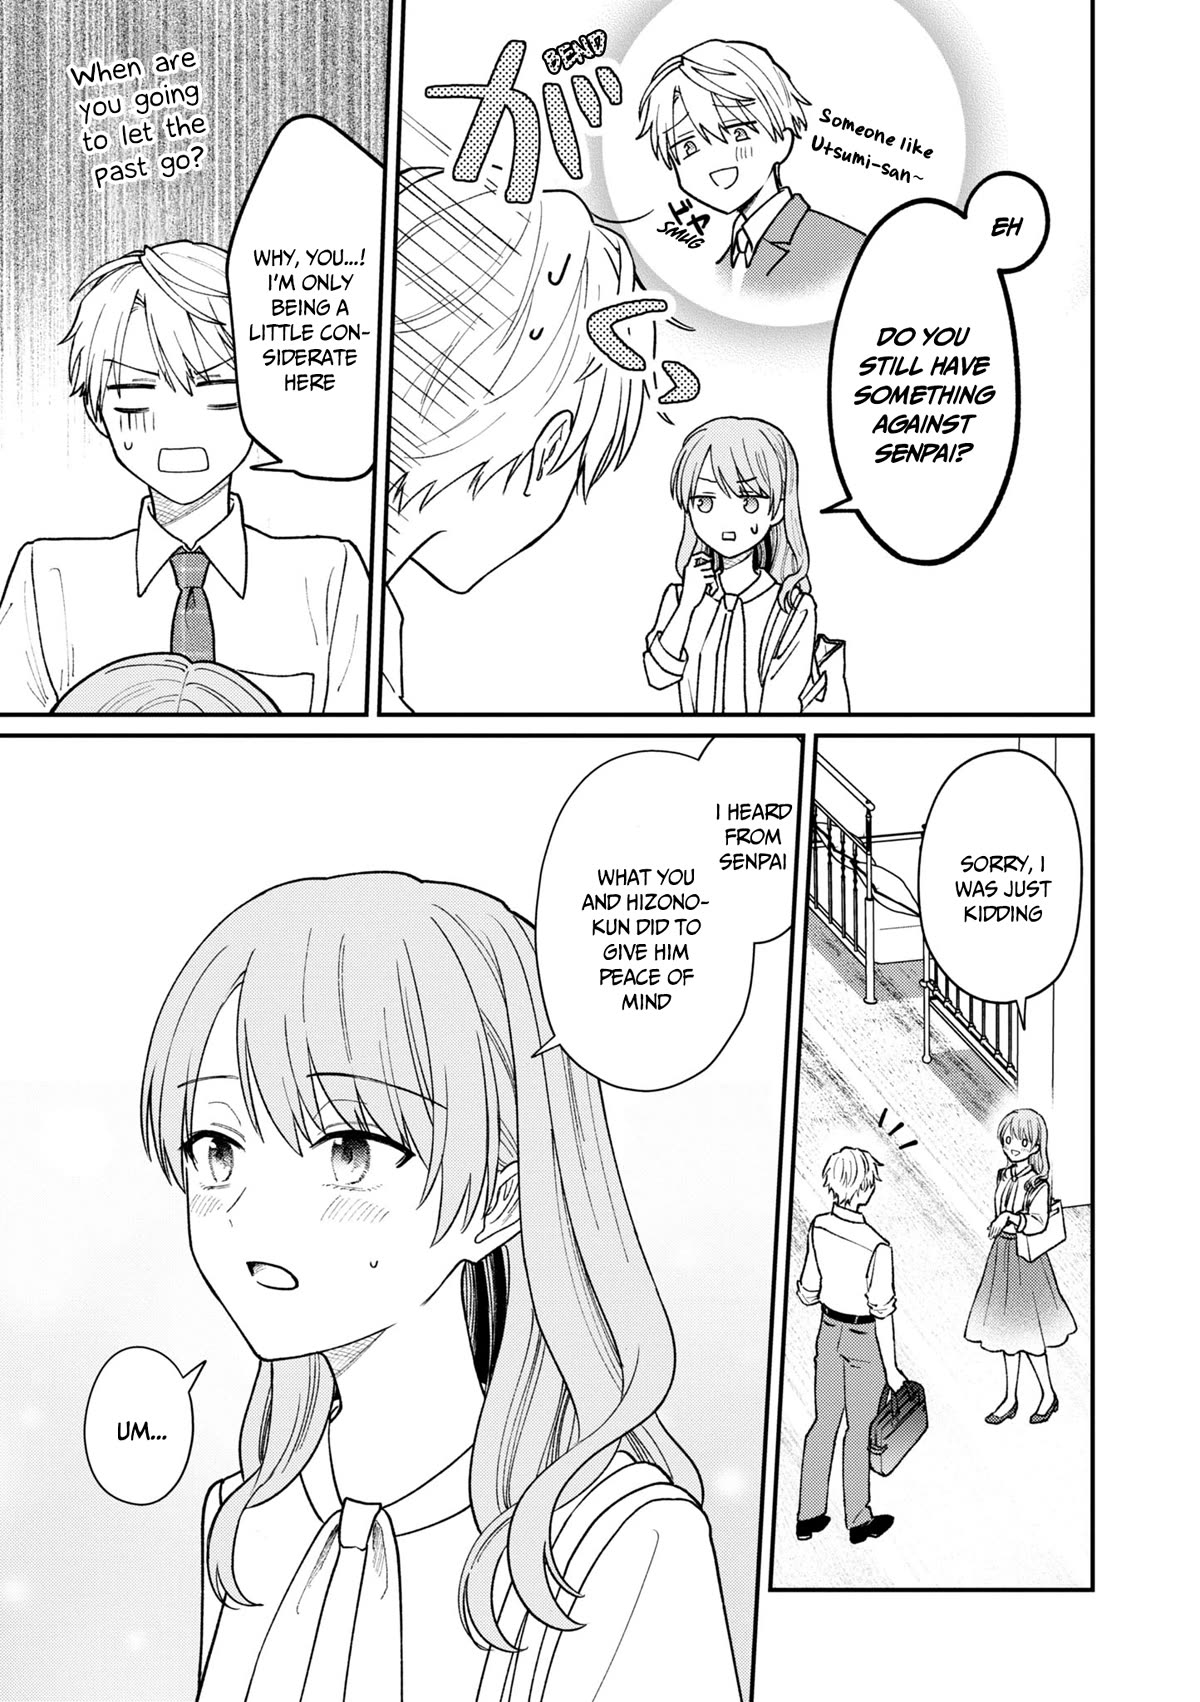 The New-Hire Who Could "Read" Emotions and the Unsociable Senpai - chapter 32.5 - #4